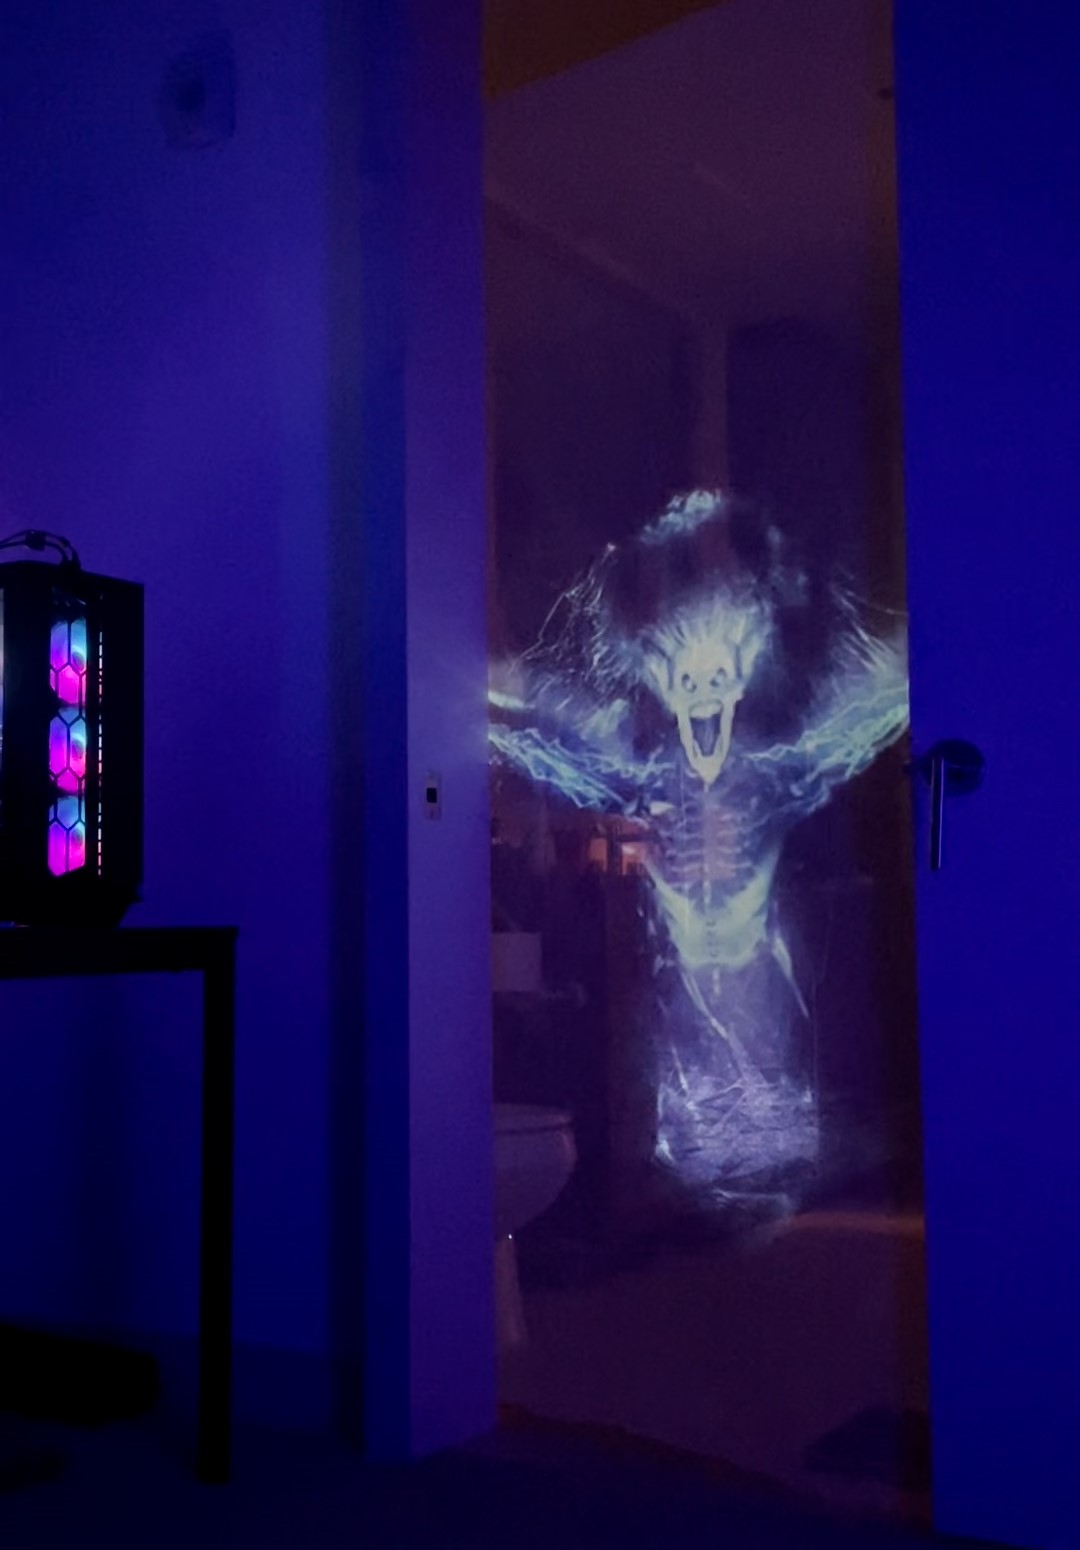 HP2 Halloween Special FX Projector's can provide great quality resolution to scare anyone!